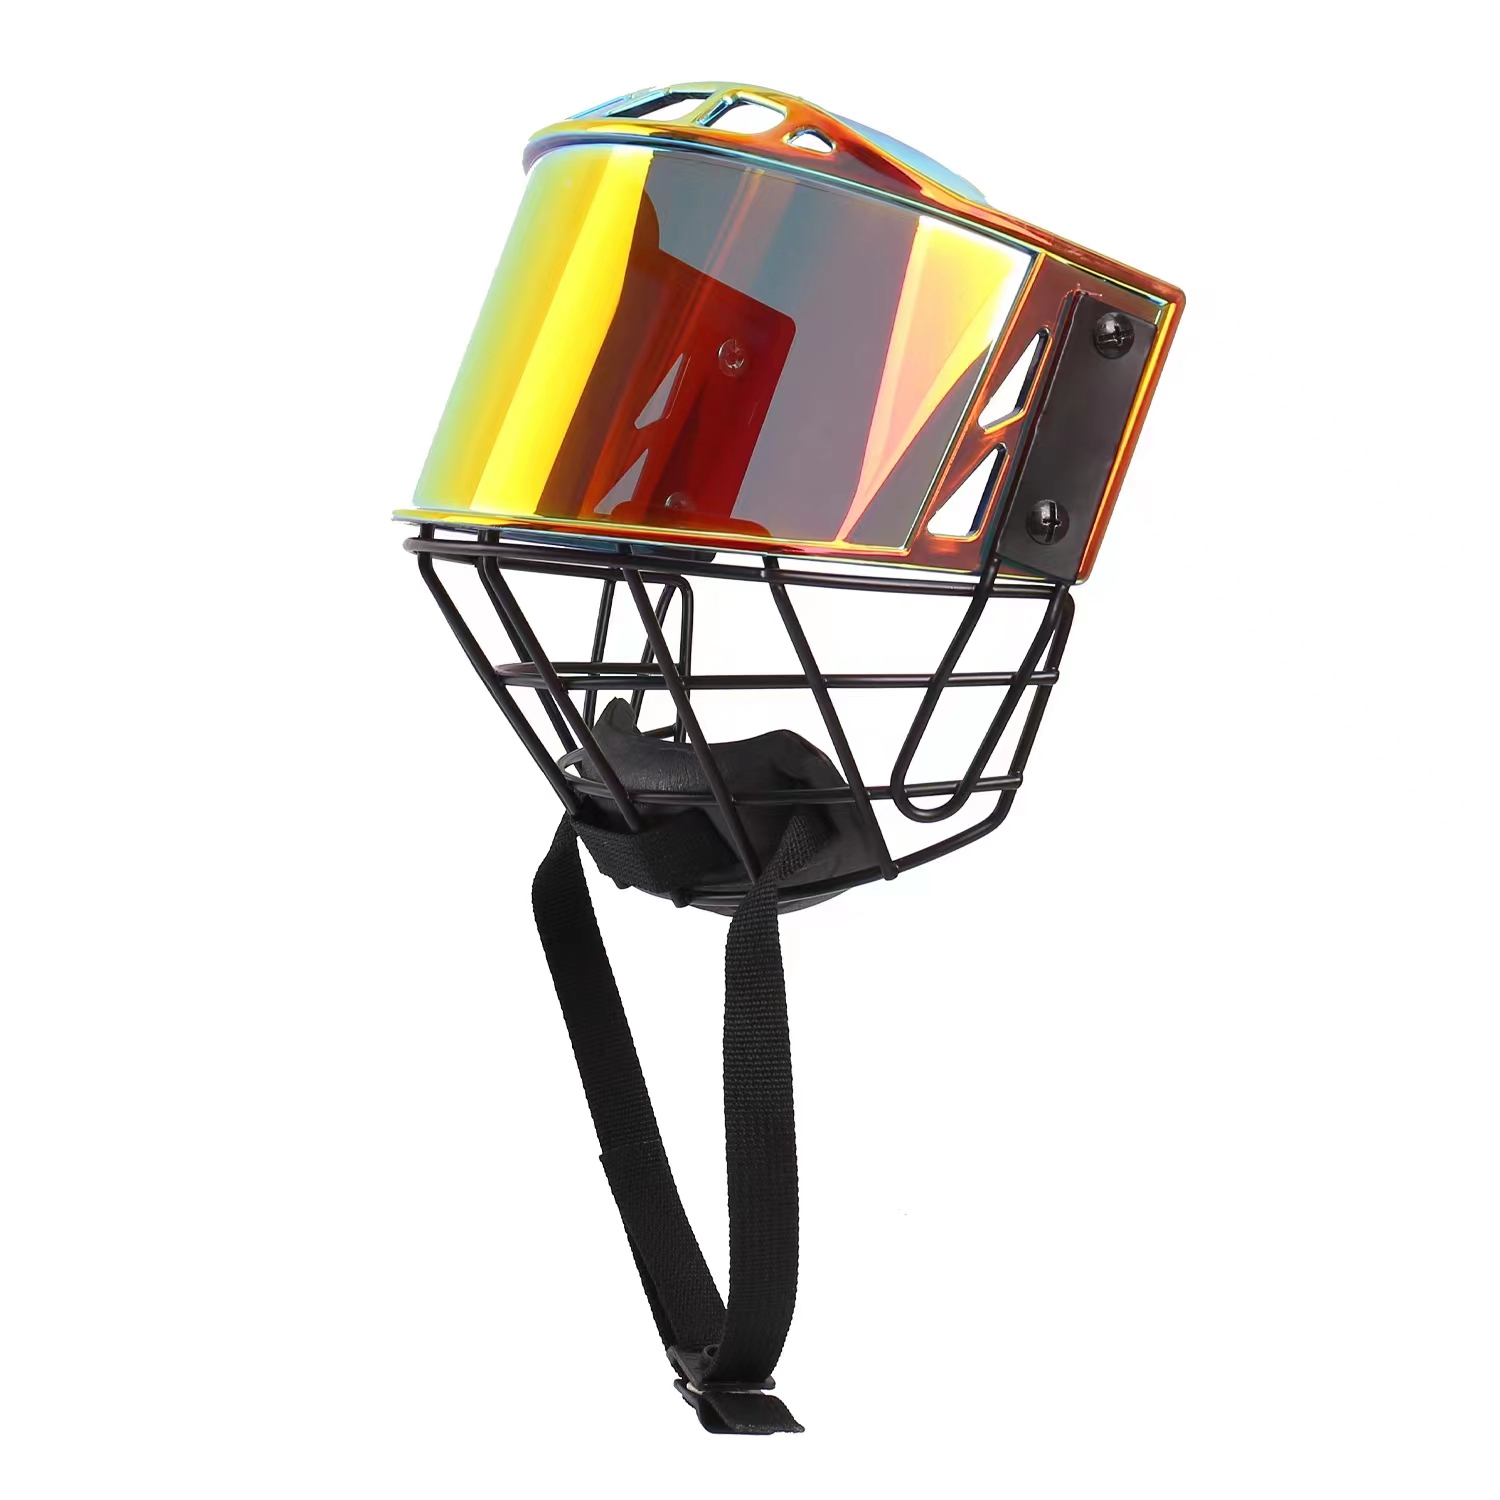 Red High Strength Ice Hockey Helmet cage For Hockey Player